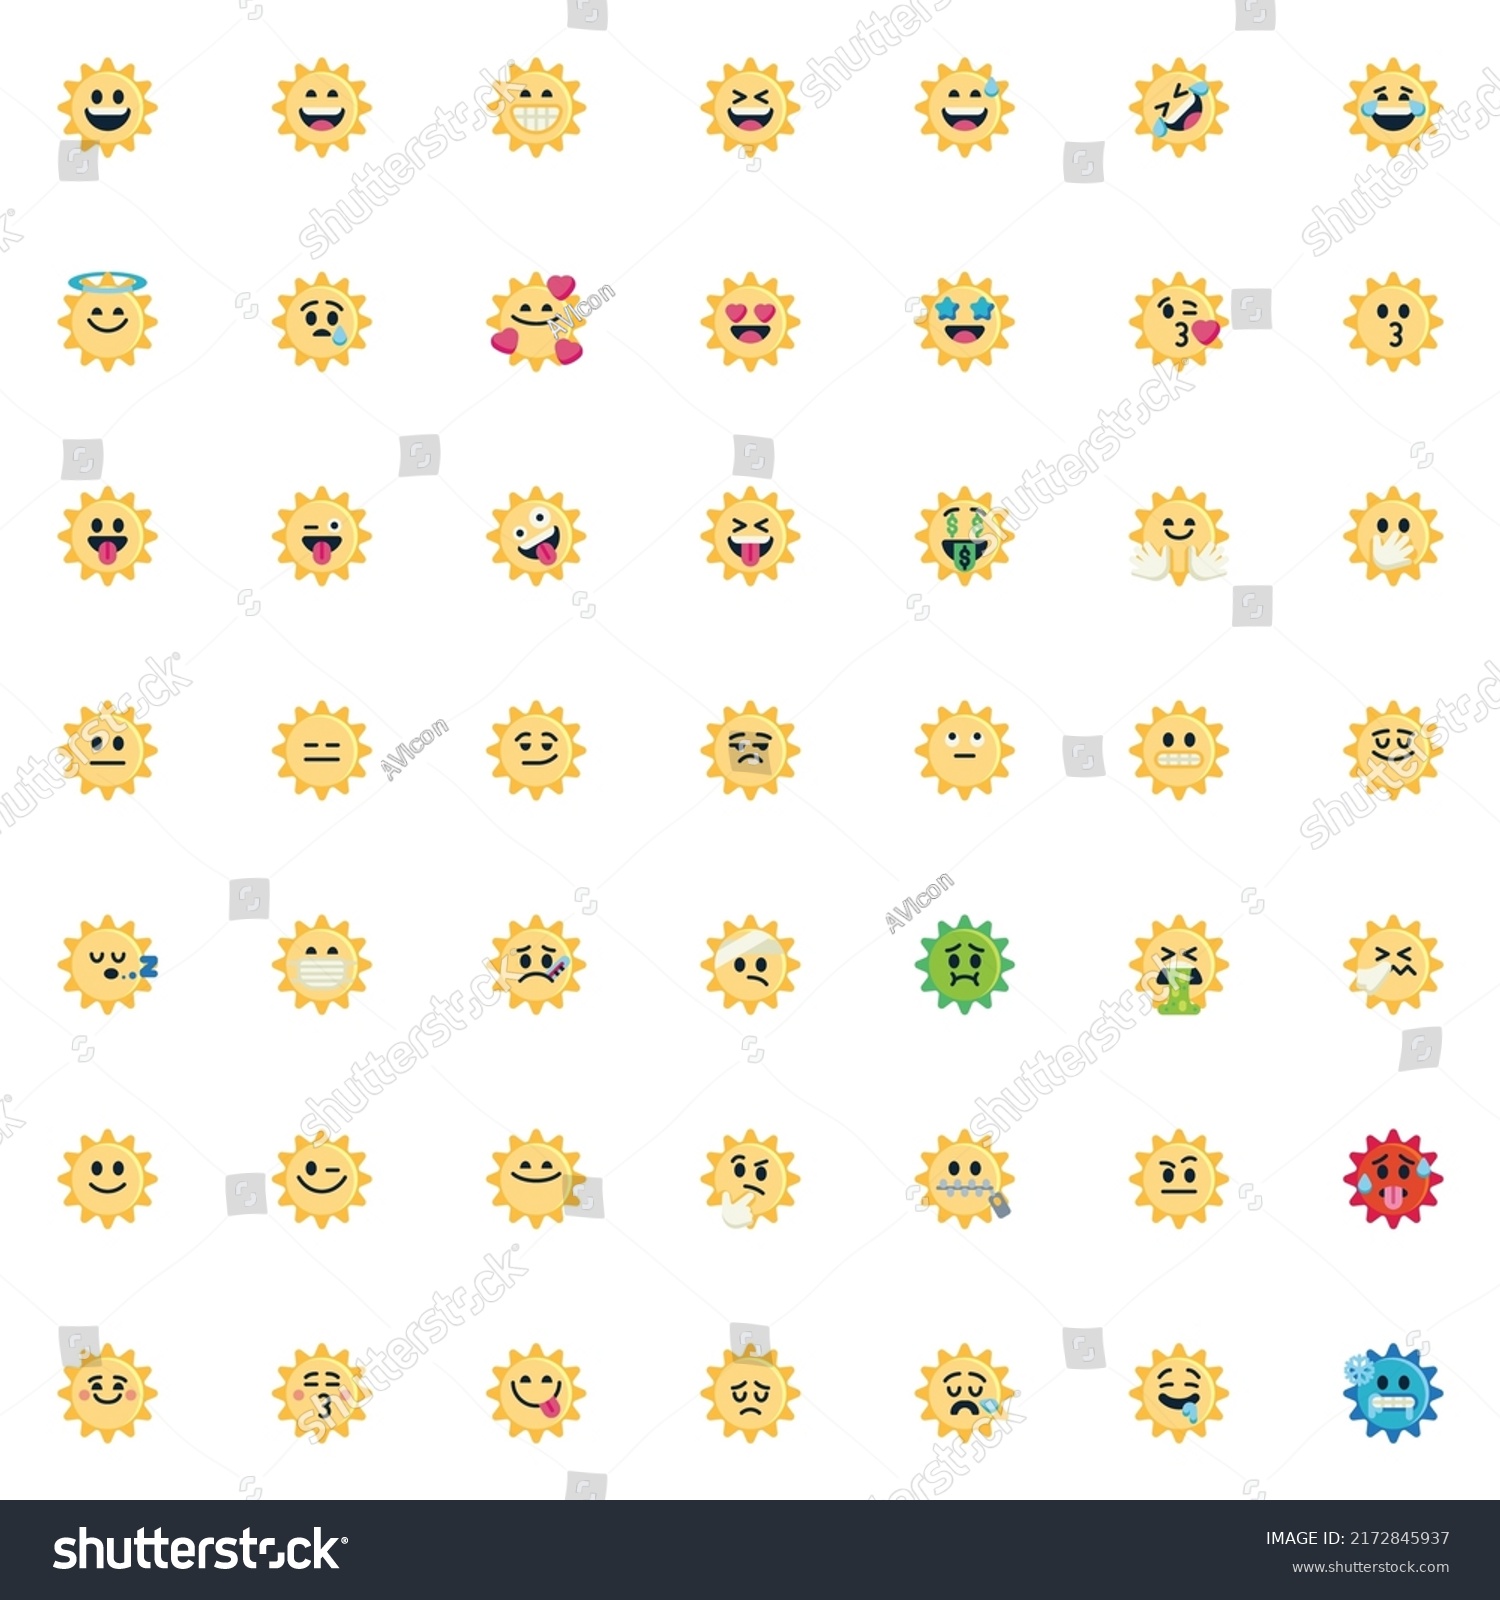 SVG of Sun face emoticon flat icons set, Colorful symbols pack contains - Winking Sun Face emoji, Blowing a Kiss smiley, Savoring Food, Money-Mouth, Neutral emotion. Vector illustration. Flat style design svg